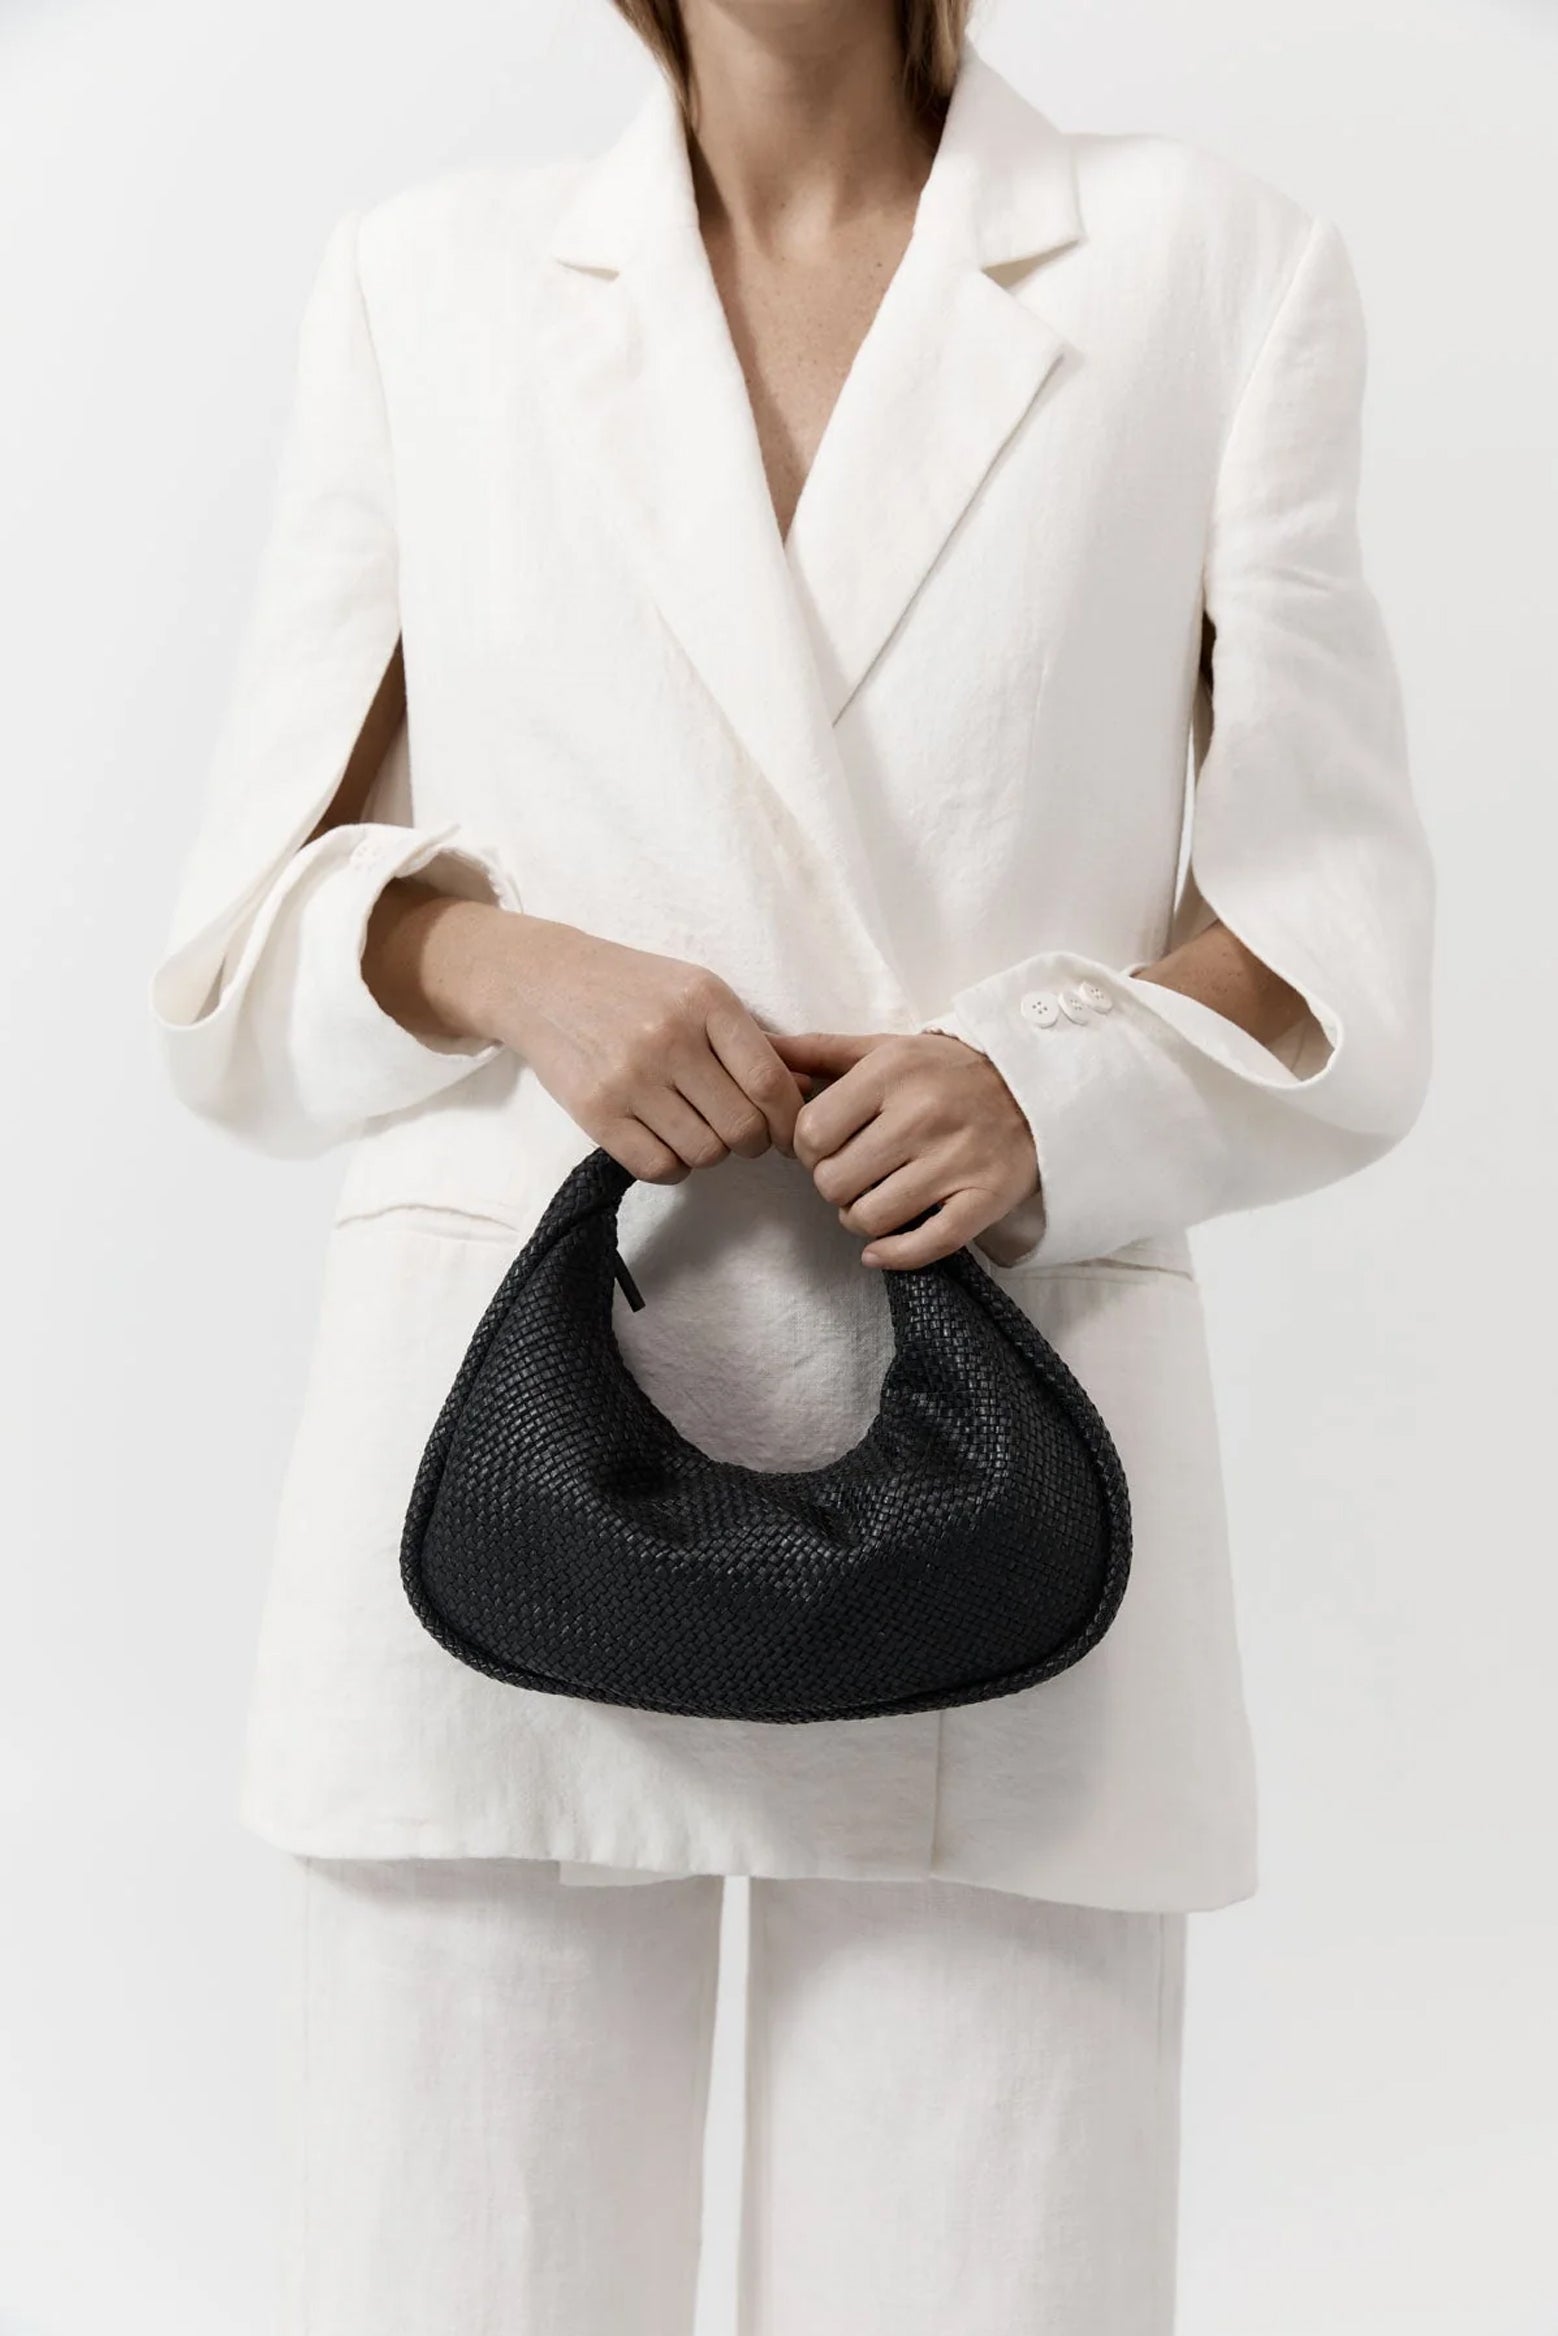 The ST. AGNI Woven Bon Bon Bag in Black from The New Trend.